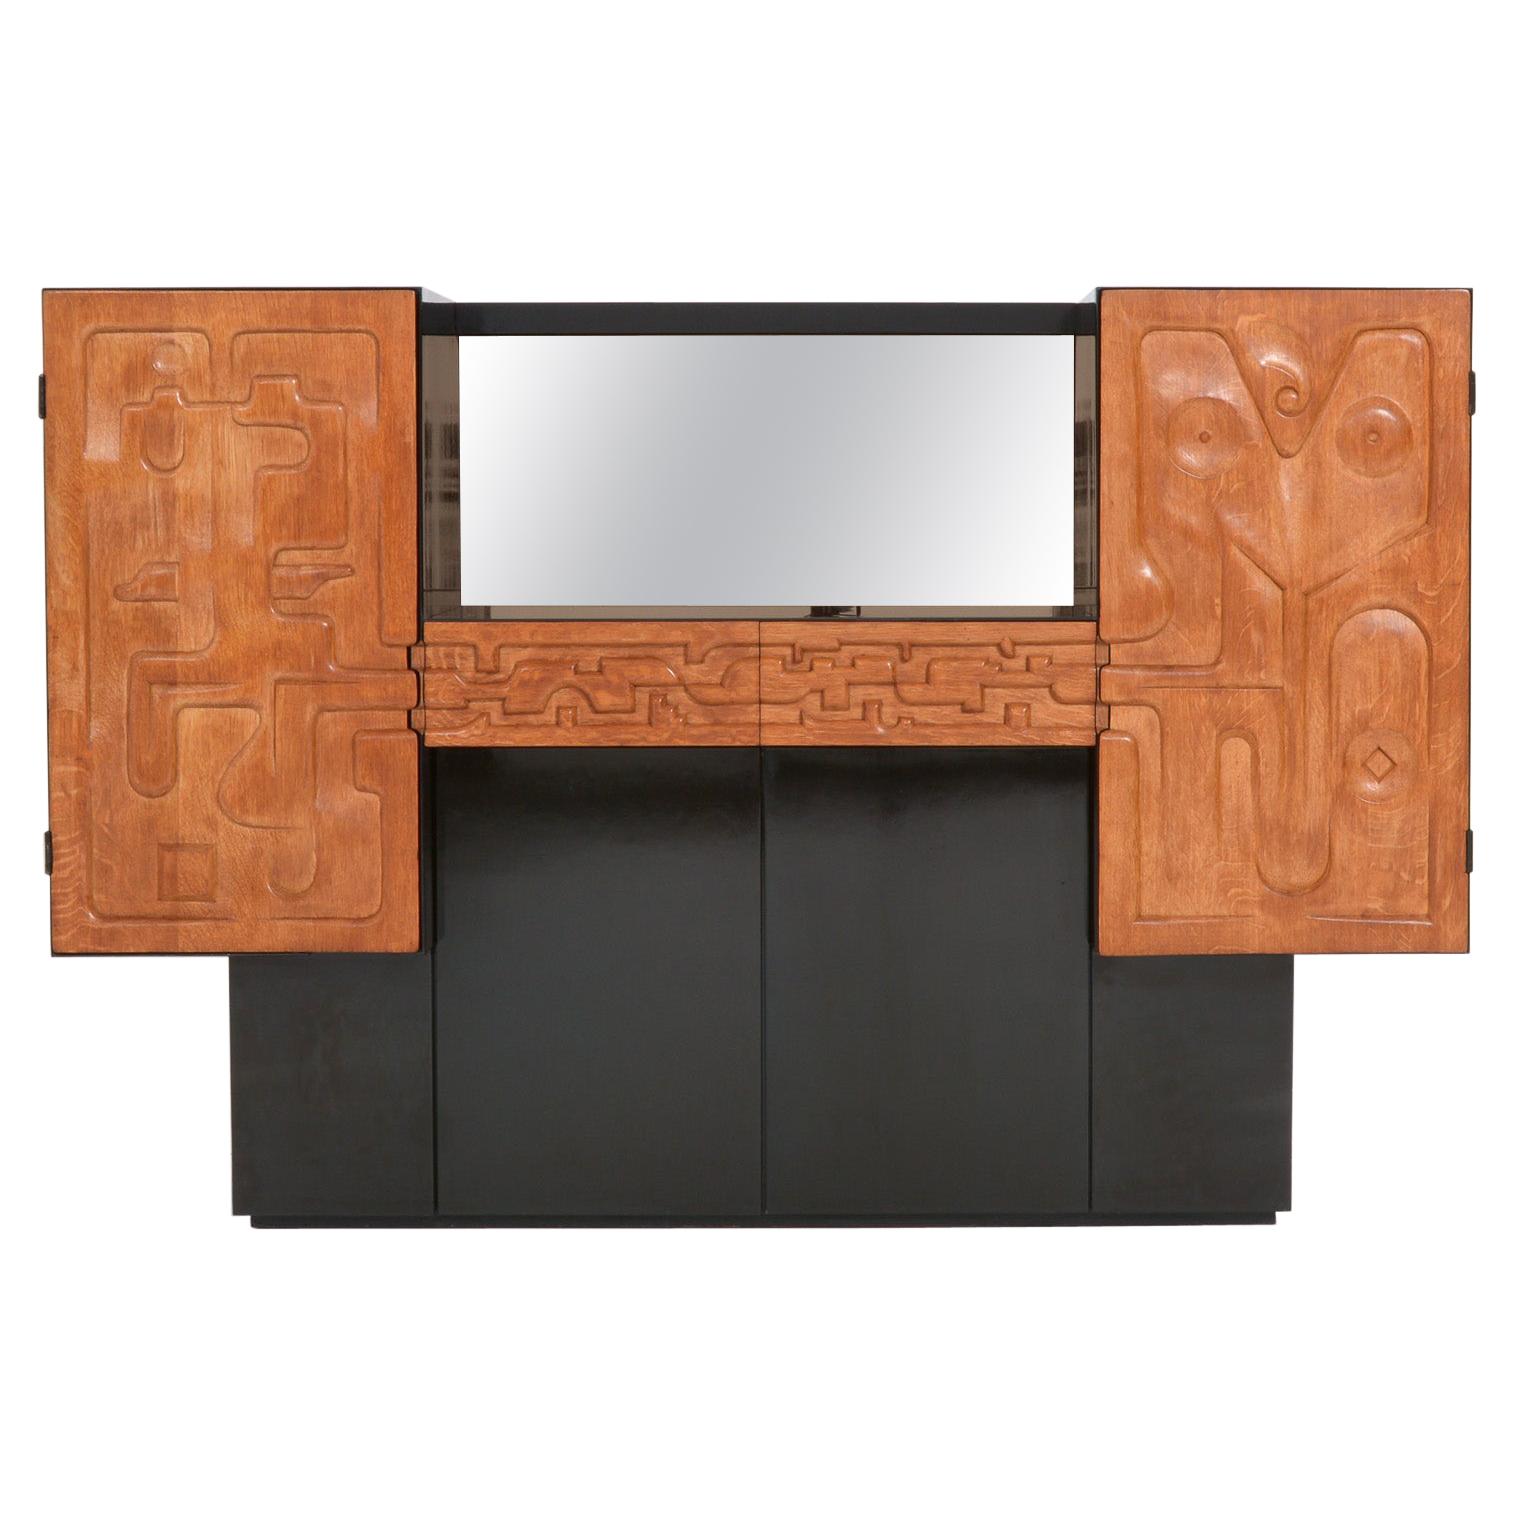 Exclusive Bar Cabinet by Paul Ghekiere, 1982